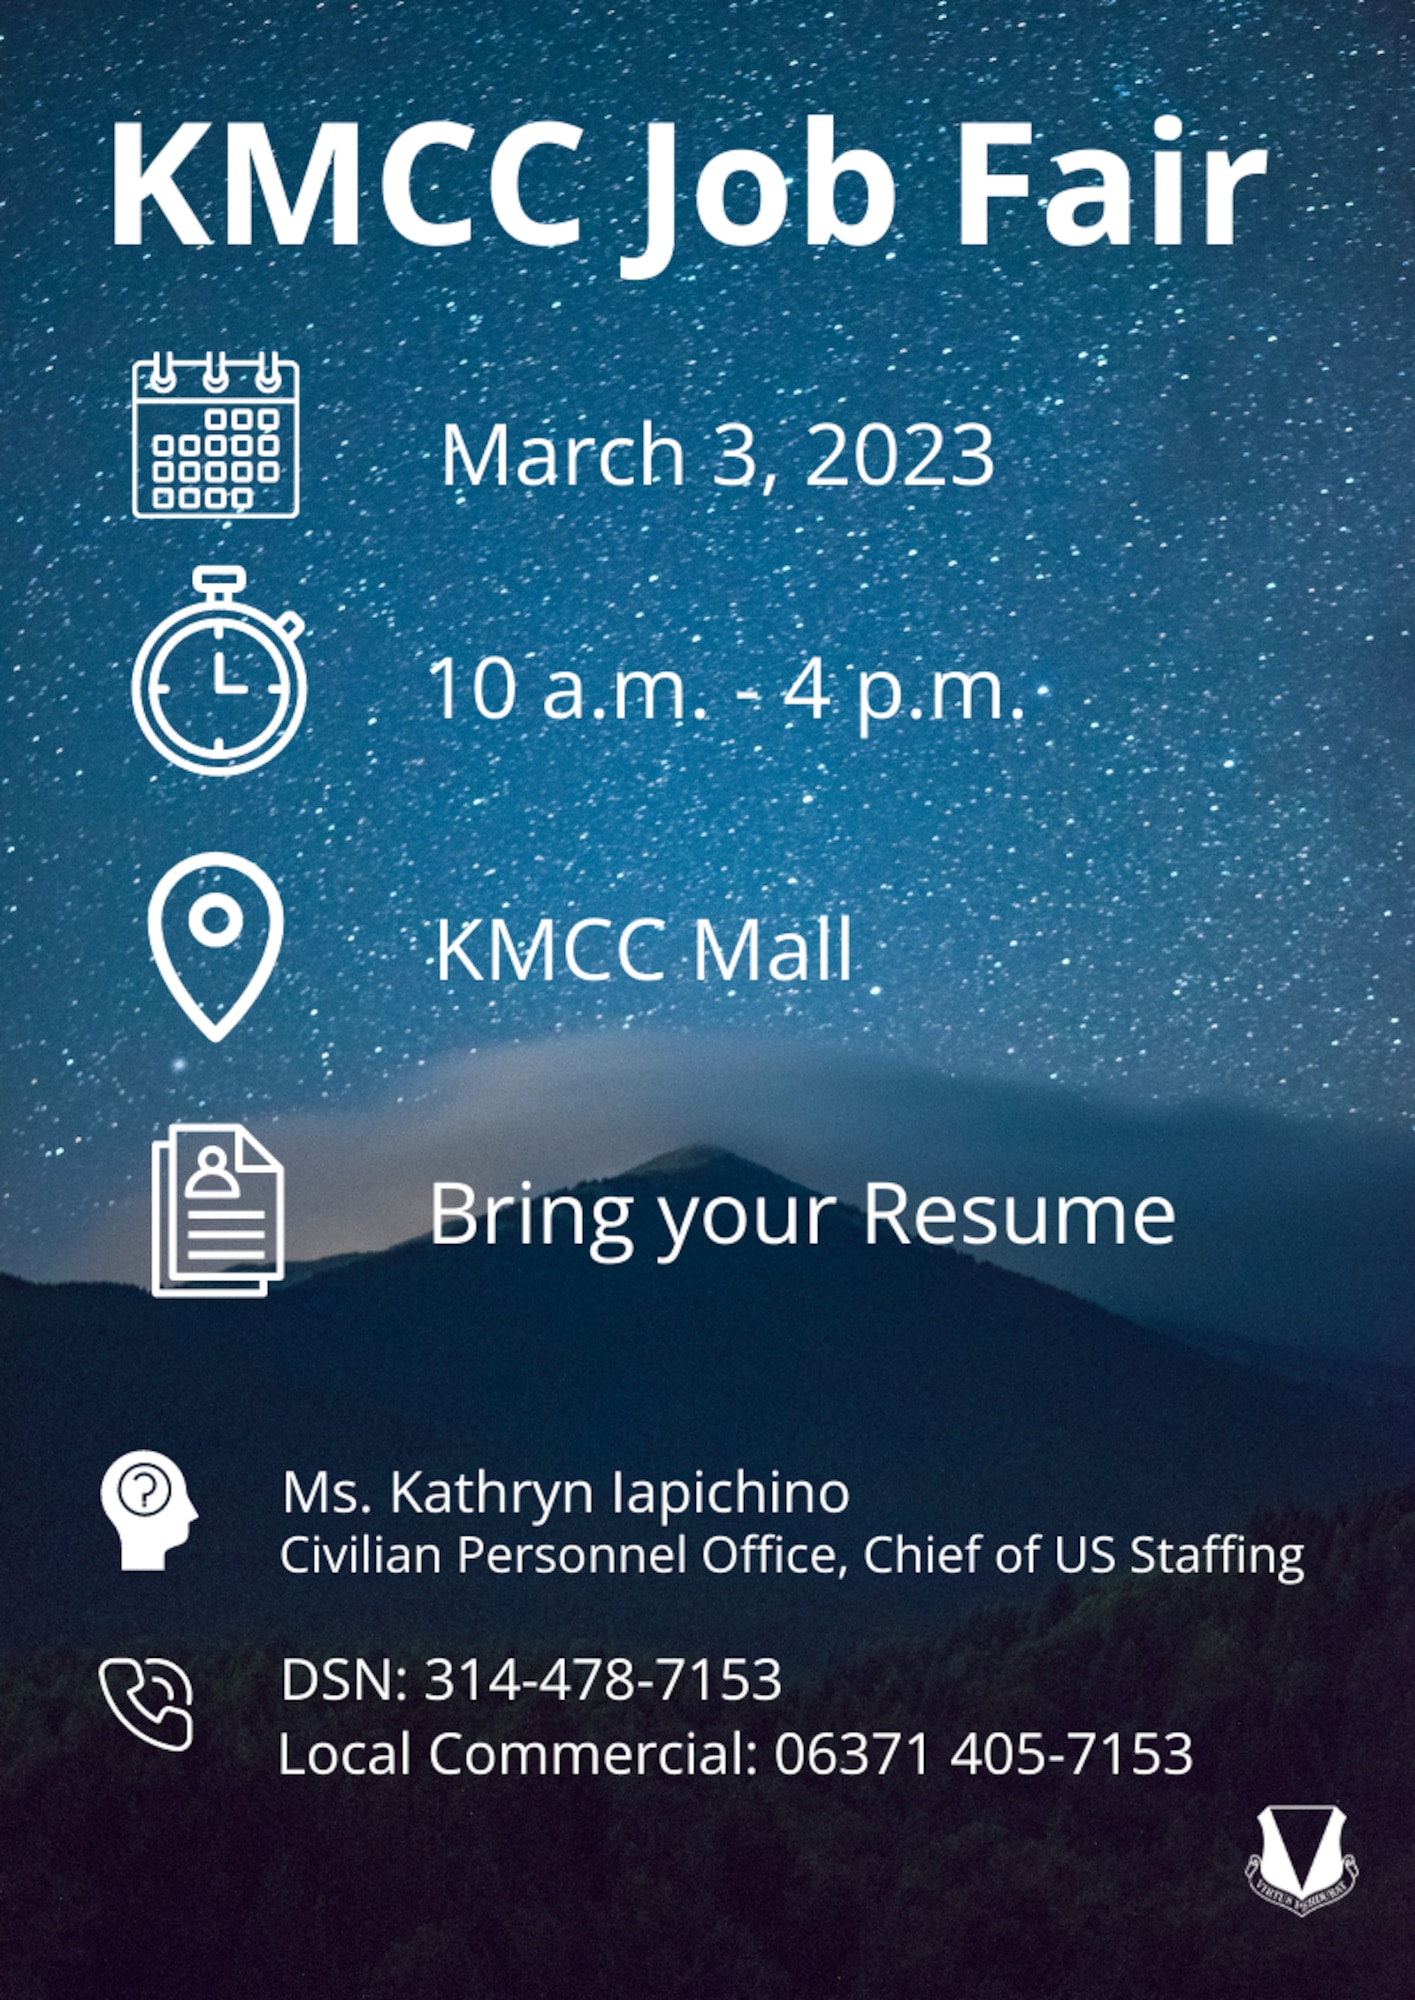 Job Fair hosted at the KMCC March 3, 2023 at 10 a.m. to 4 p.m.